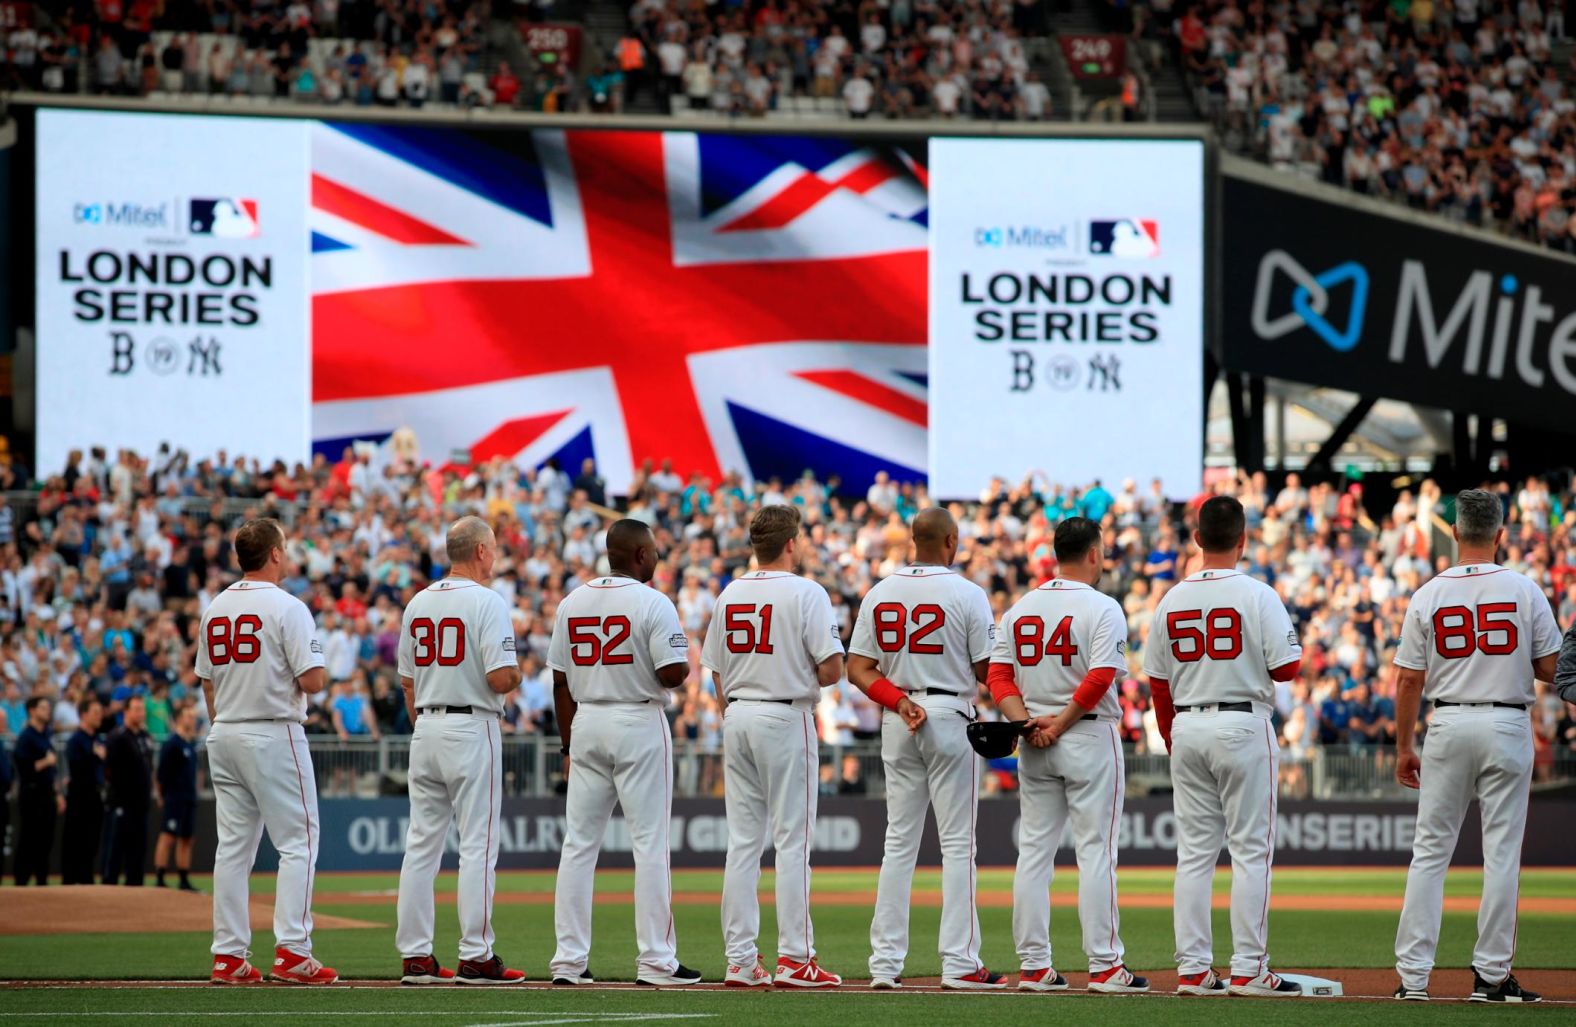 Boston Red Sox players stand for the national anthem before a game one of the first-ever MLB London Series on June 29.